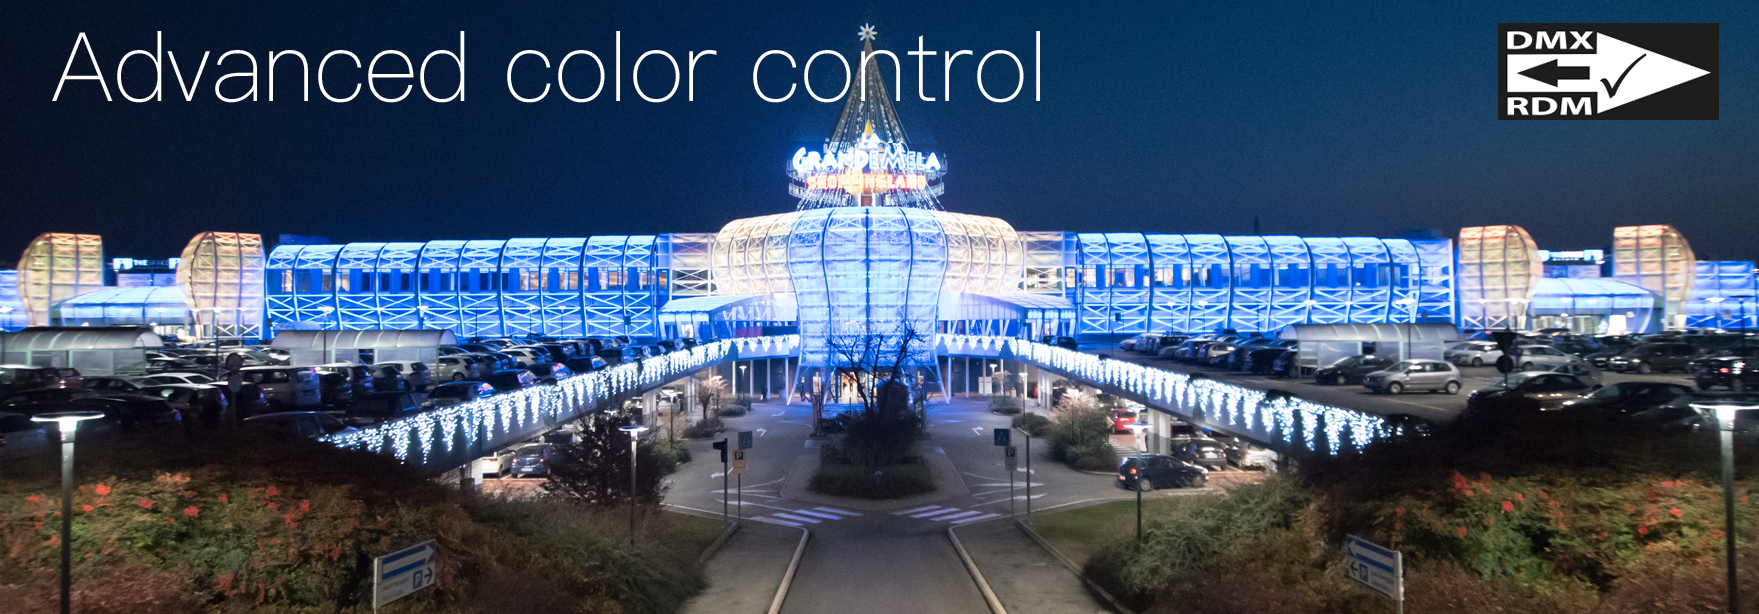 Advanced control of professional lighting projects using DMX technology